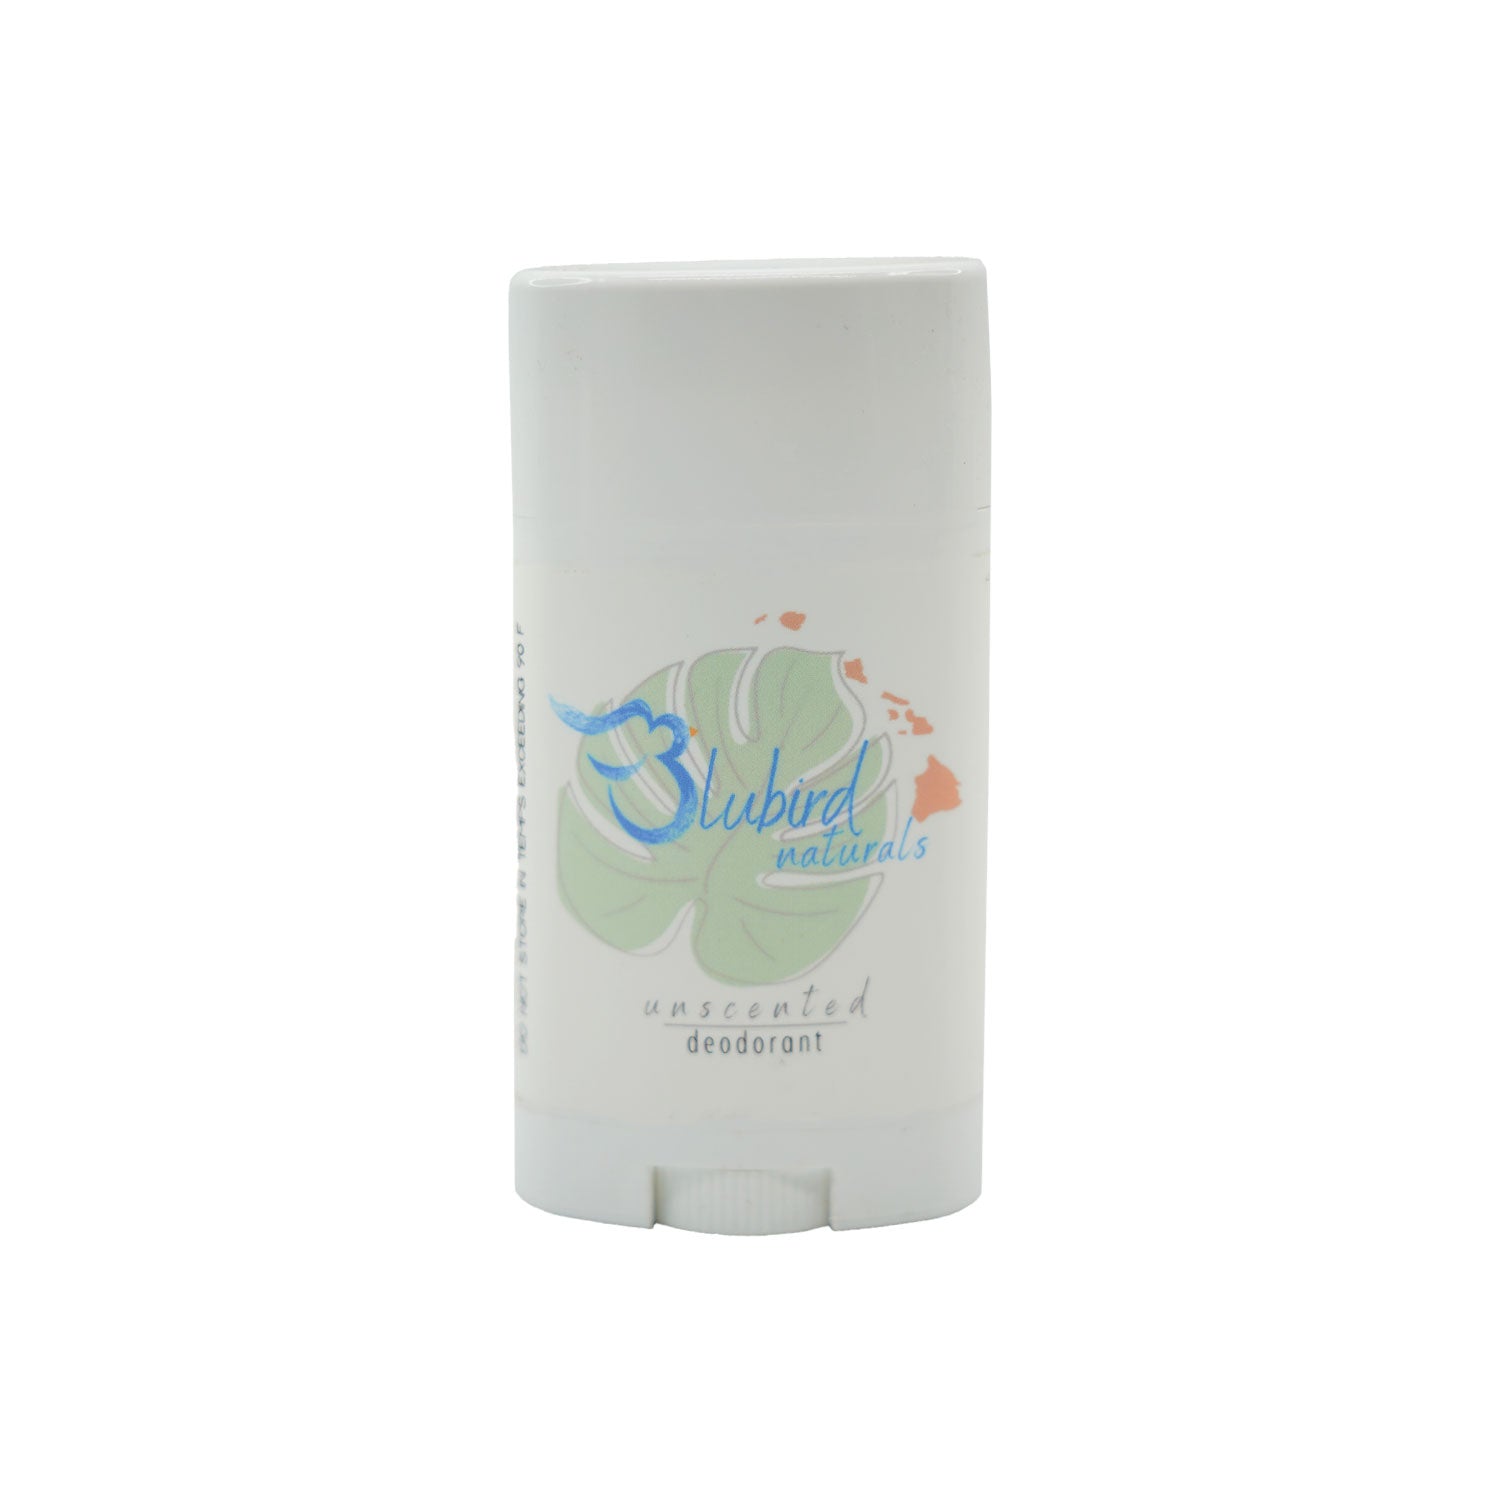 Stay fresh and clean with Blubird Naturals Deodorant! Benefit from chemical-free, fragrance-free, all natural ingredients.